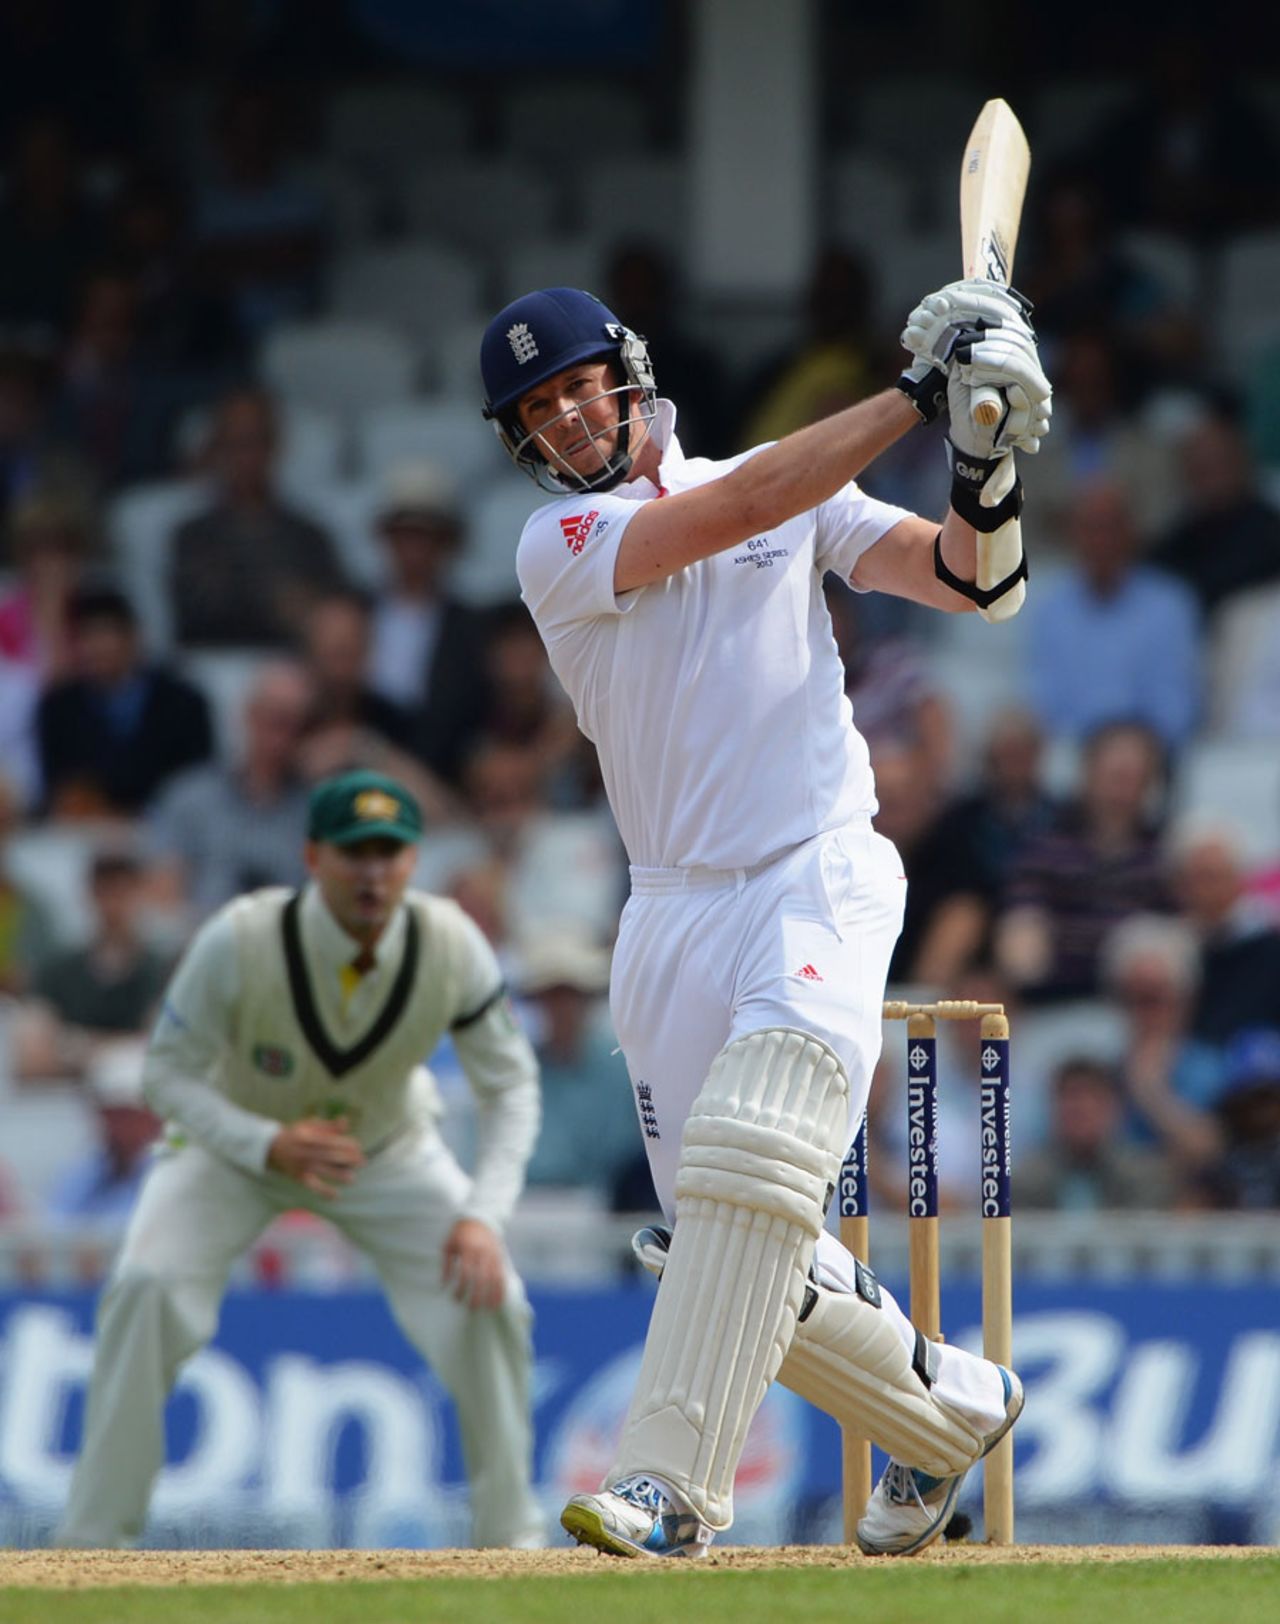 Graeme Swann thrashed 34 off 24 balls, England v Australia, 5th Investec Test, The Oval, 5th day, August 25, 2013